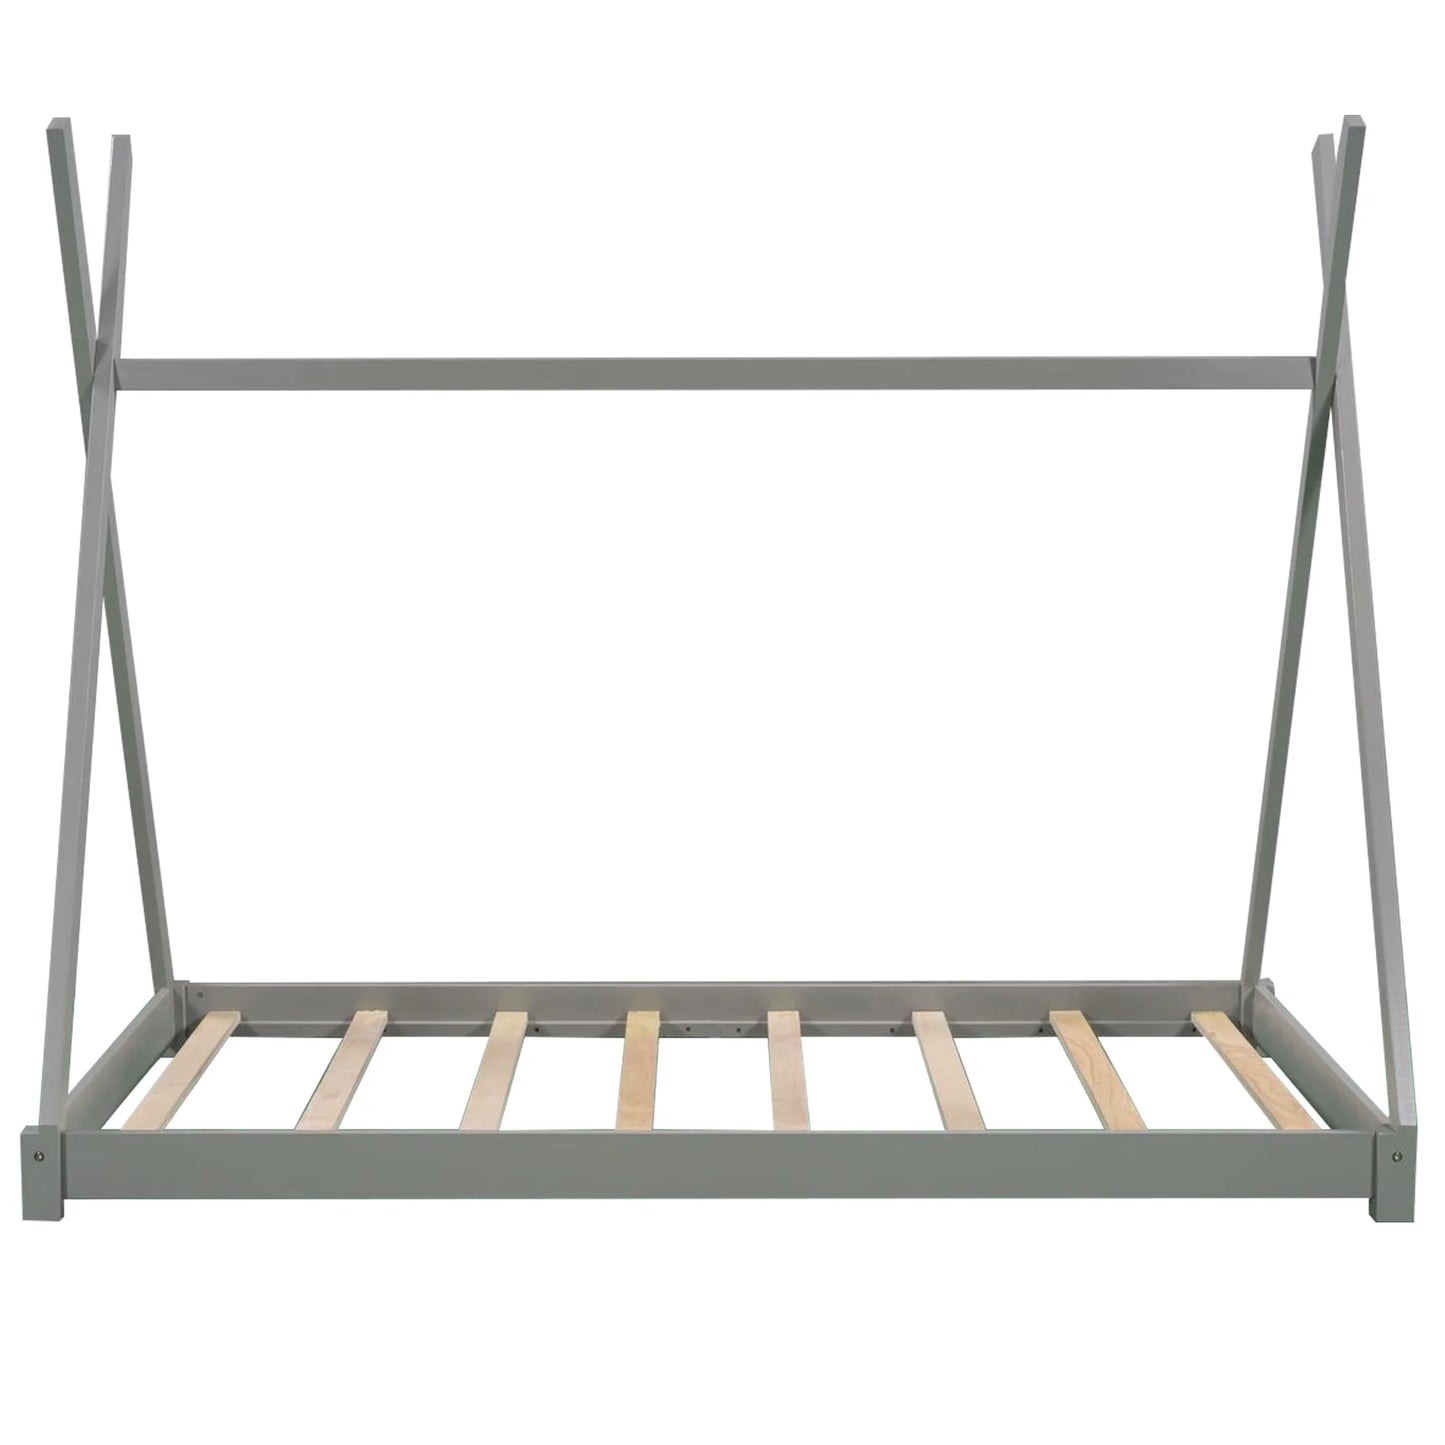 House Platform Bed with Triangle Structure in Gray